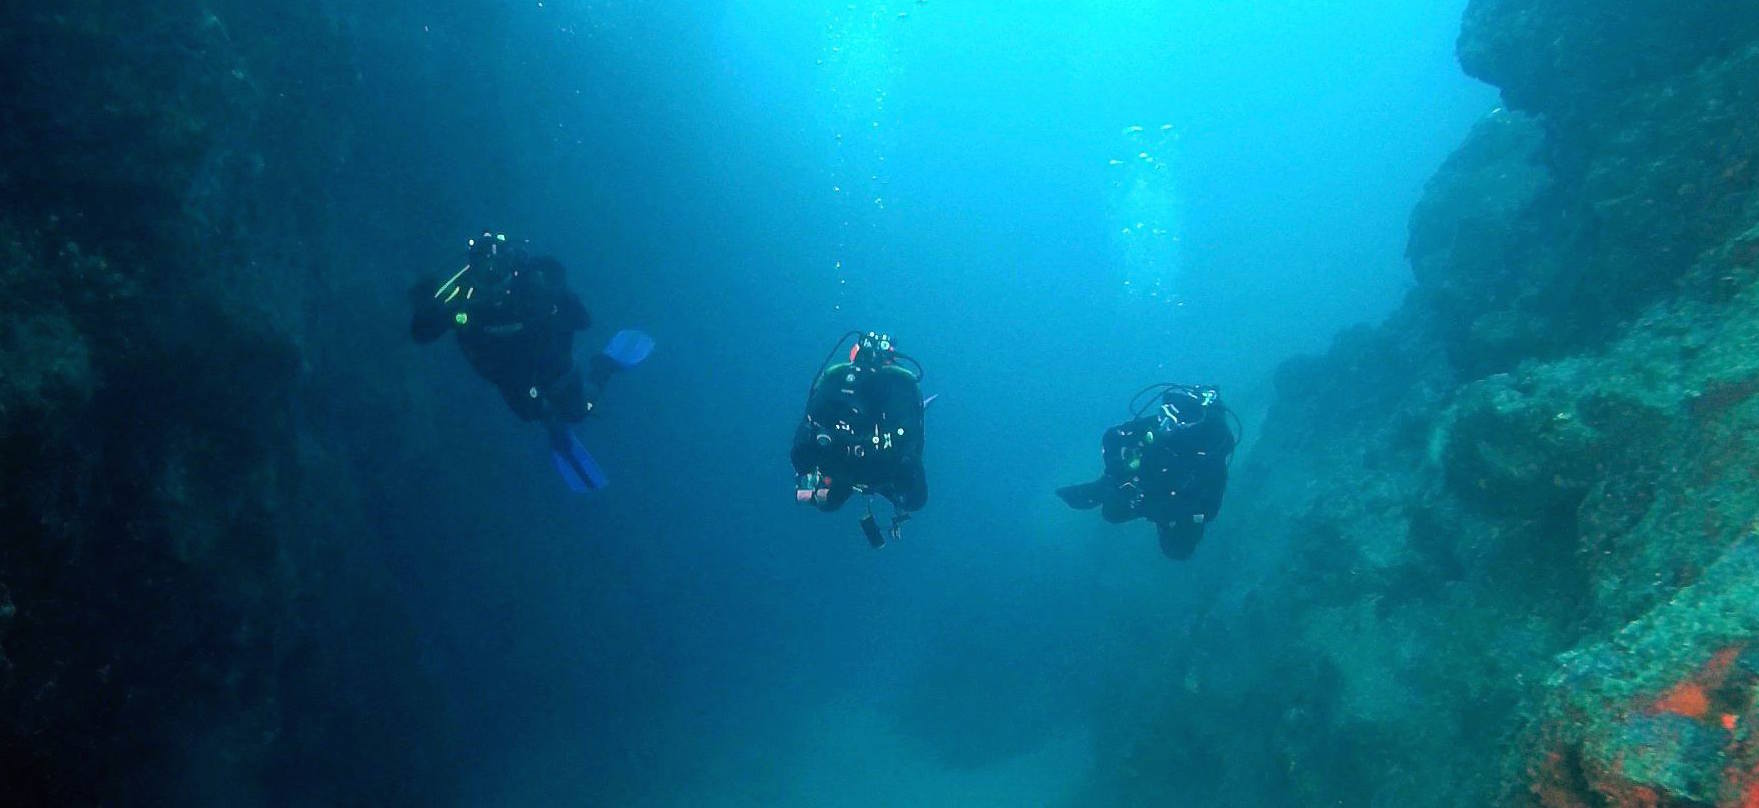 Scuba diving in Sicily is only for certified divers